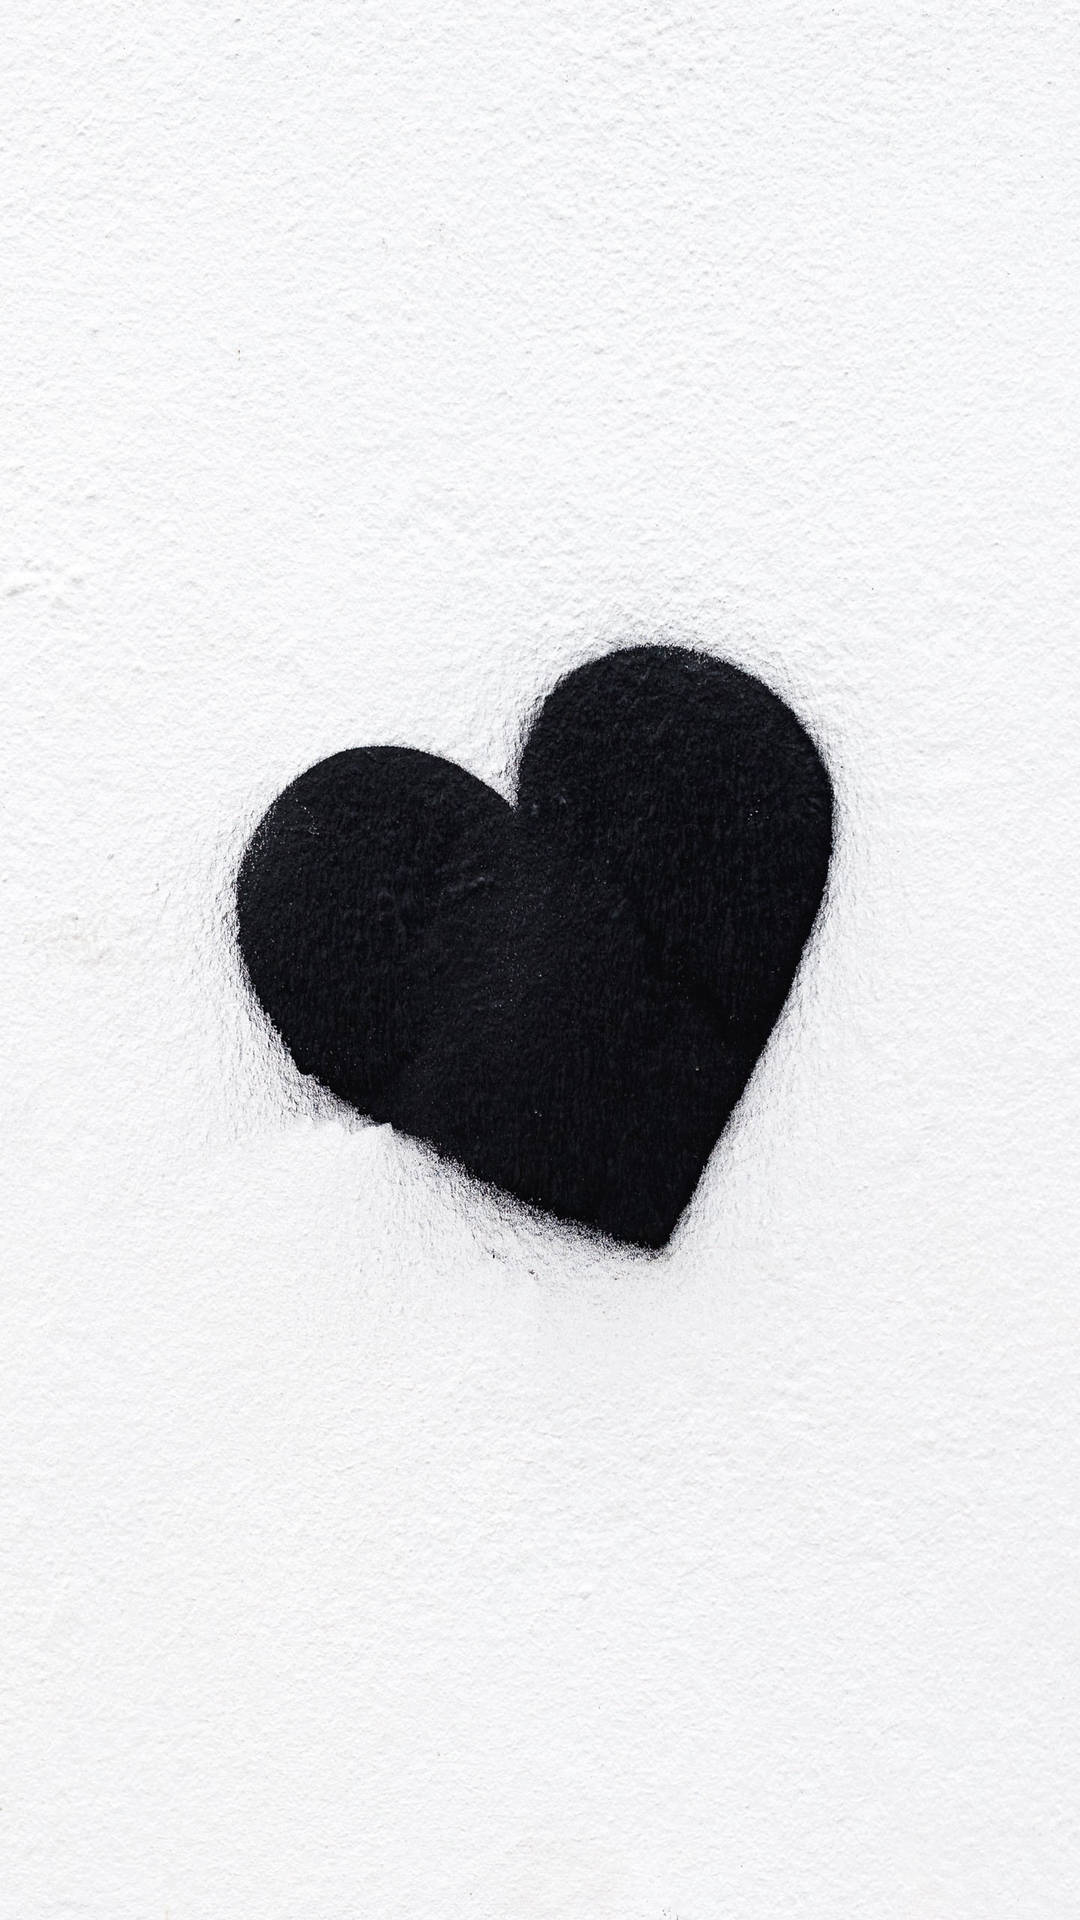 Spray Painted Black And White Heart Wallpaper